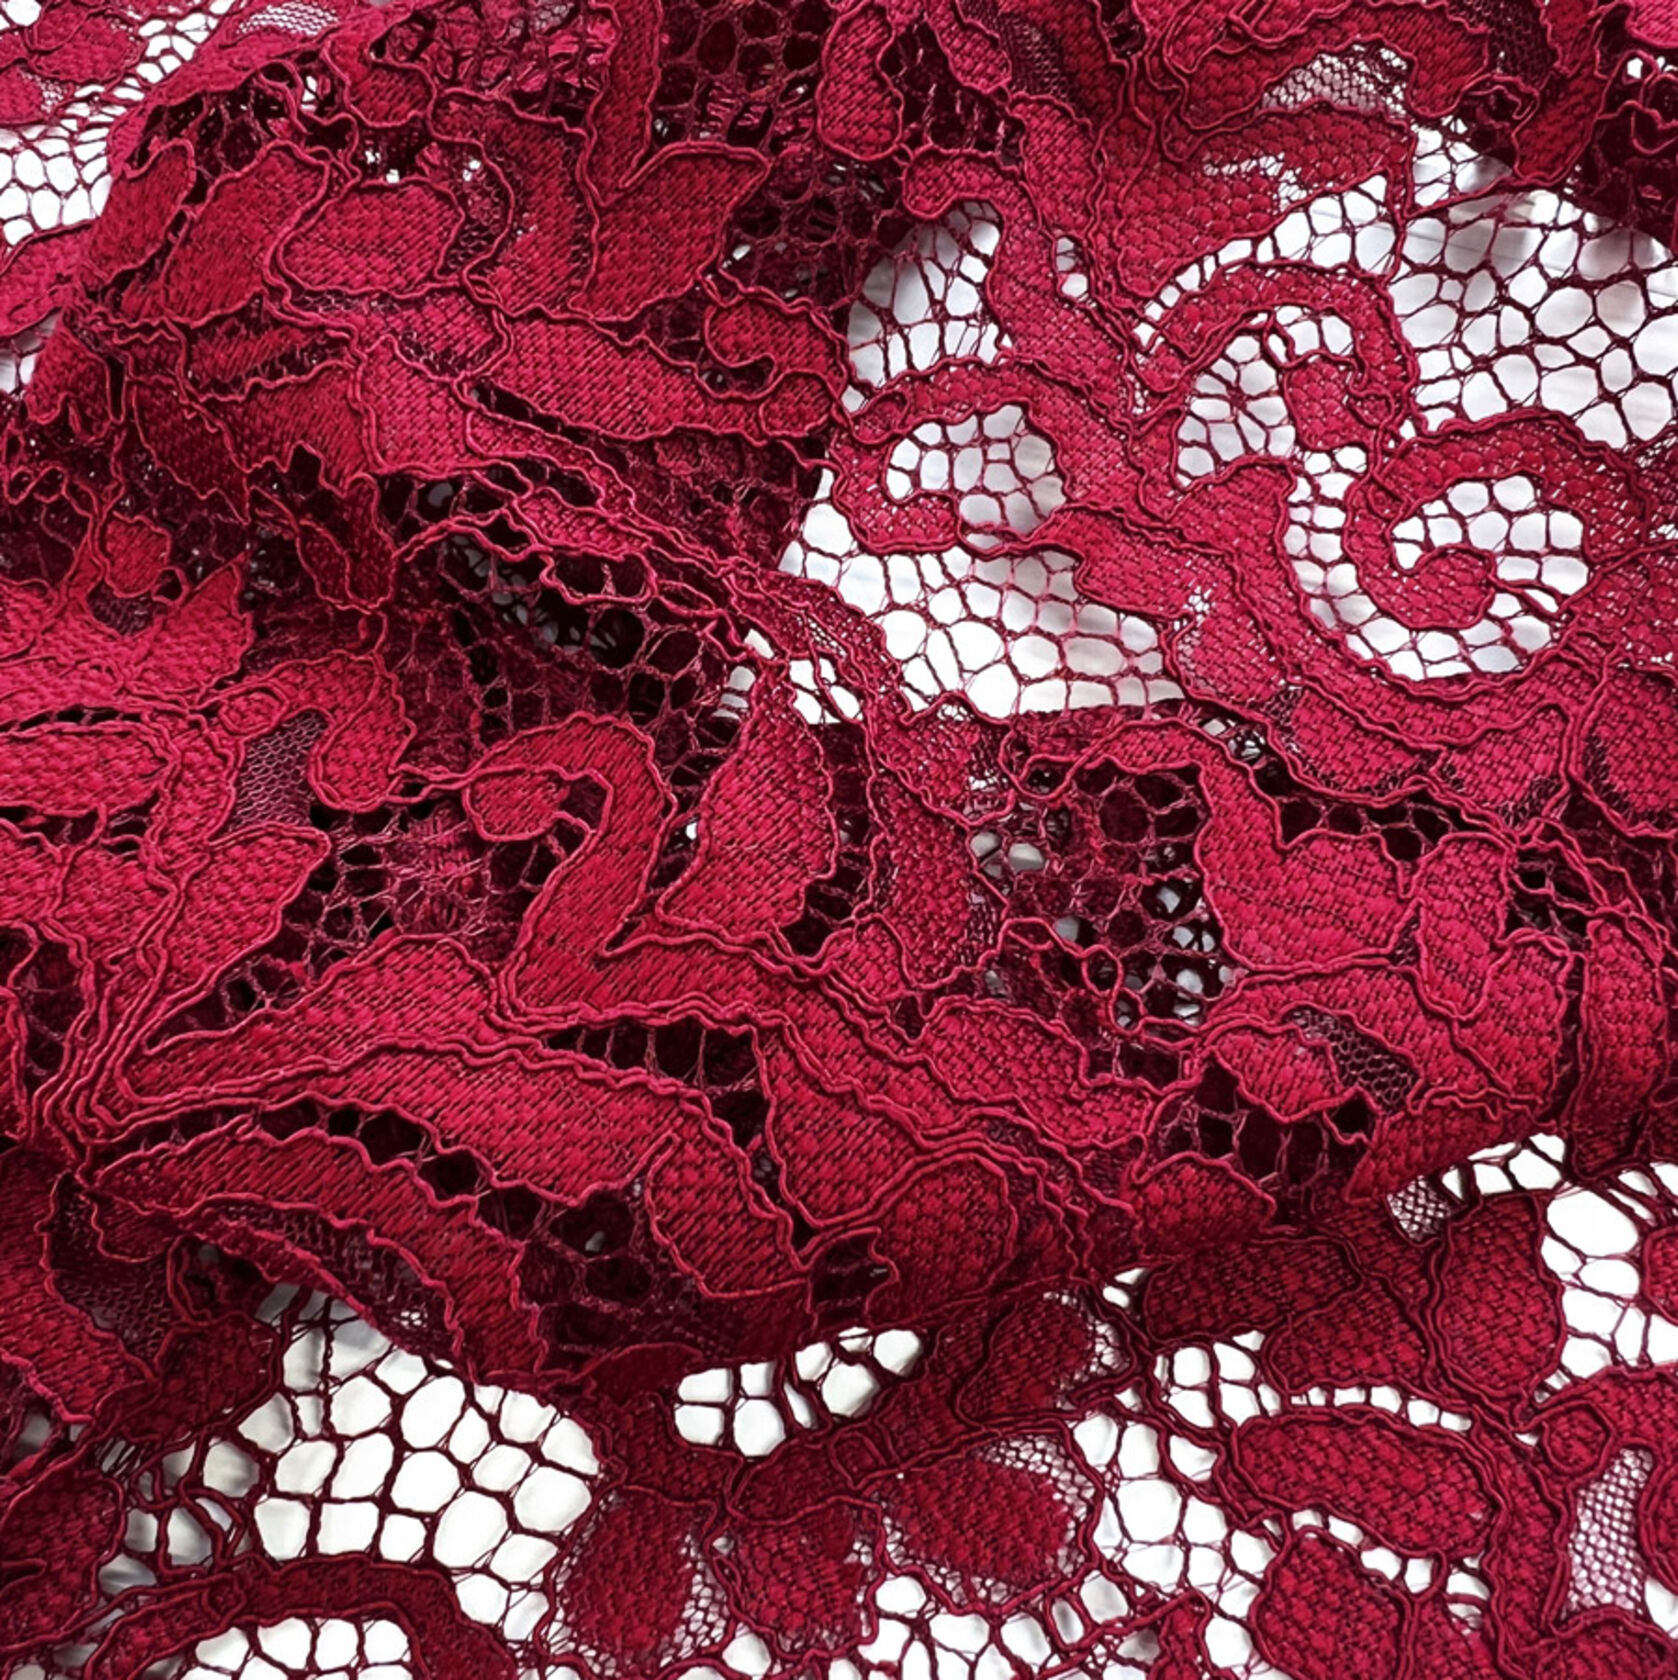 Corded Lace - Burgundy